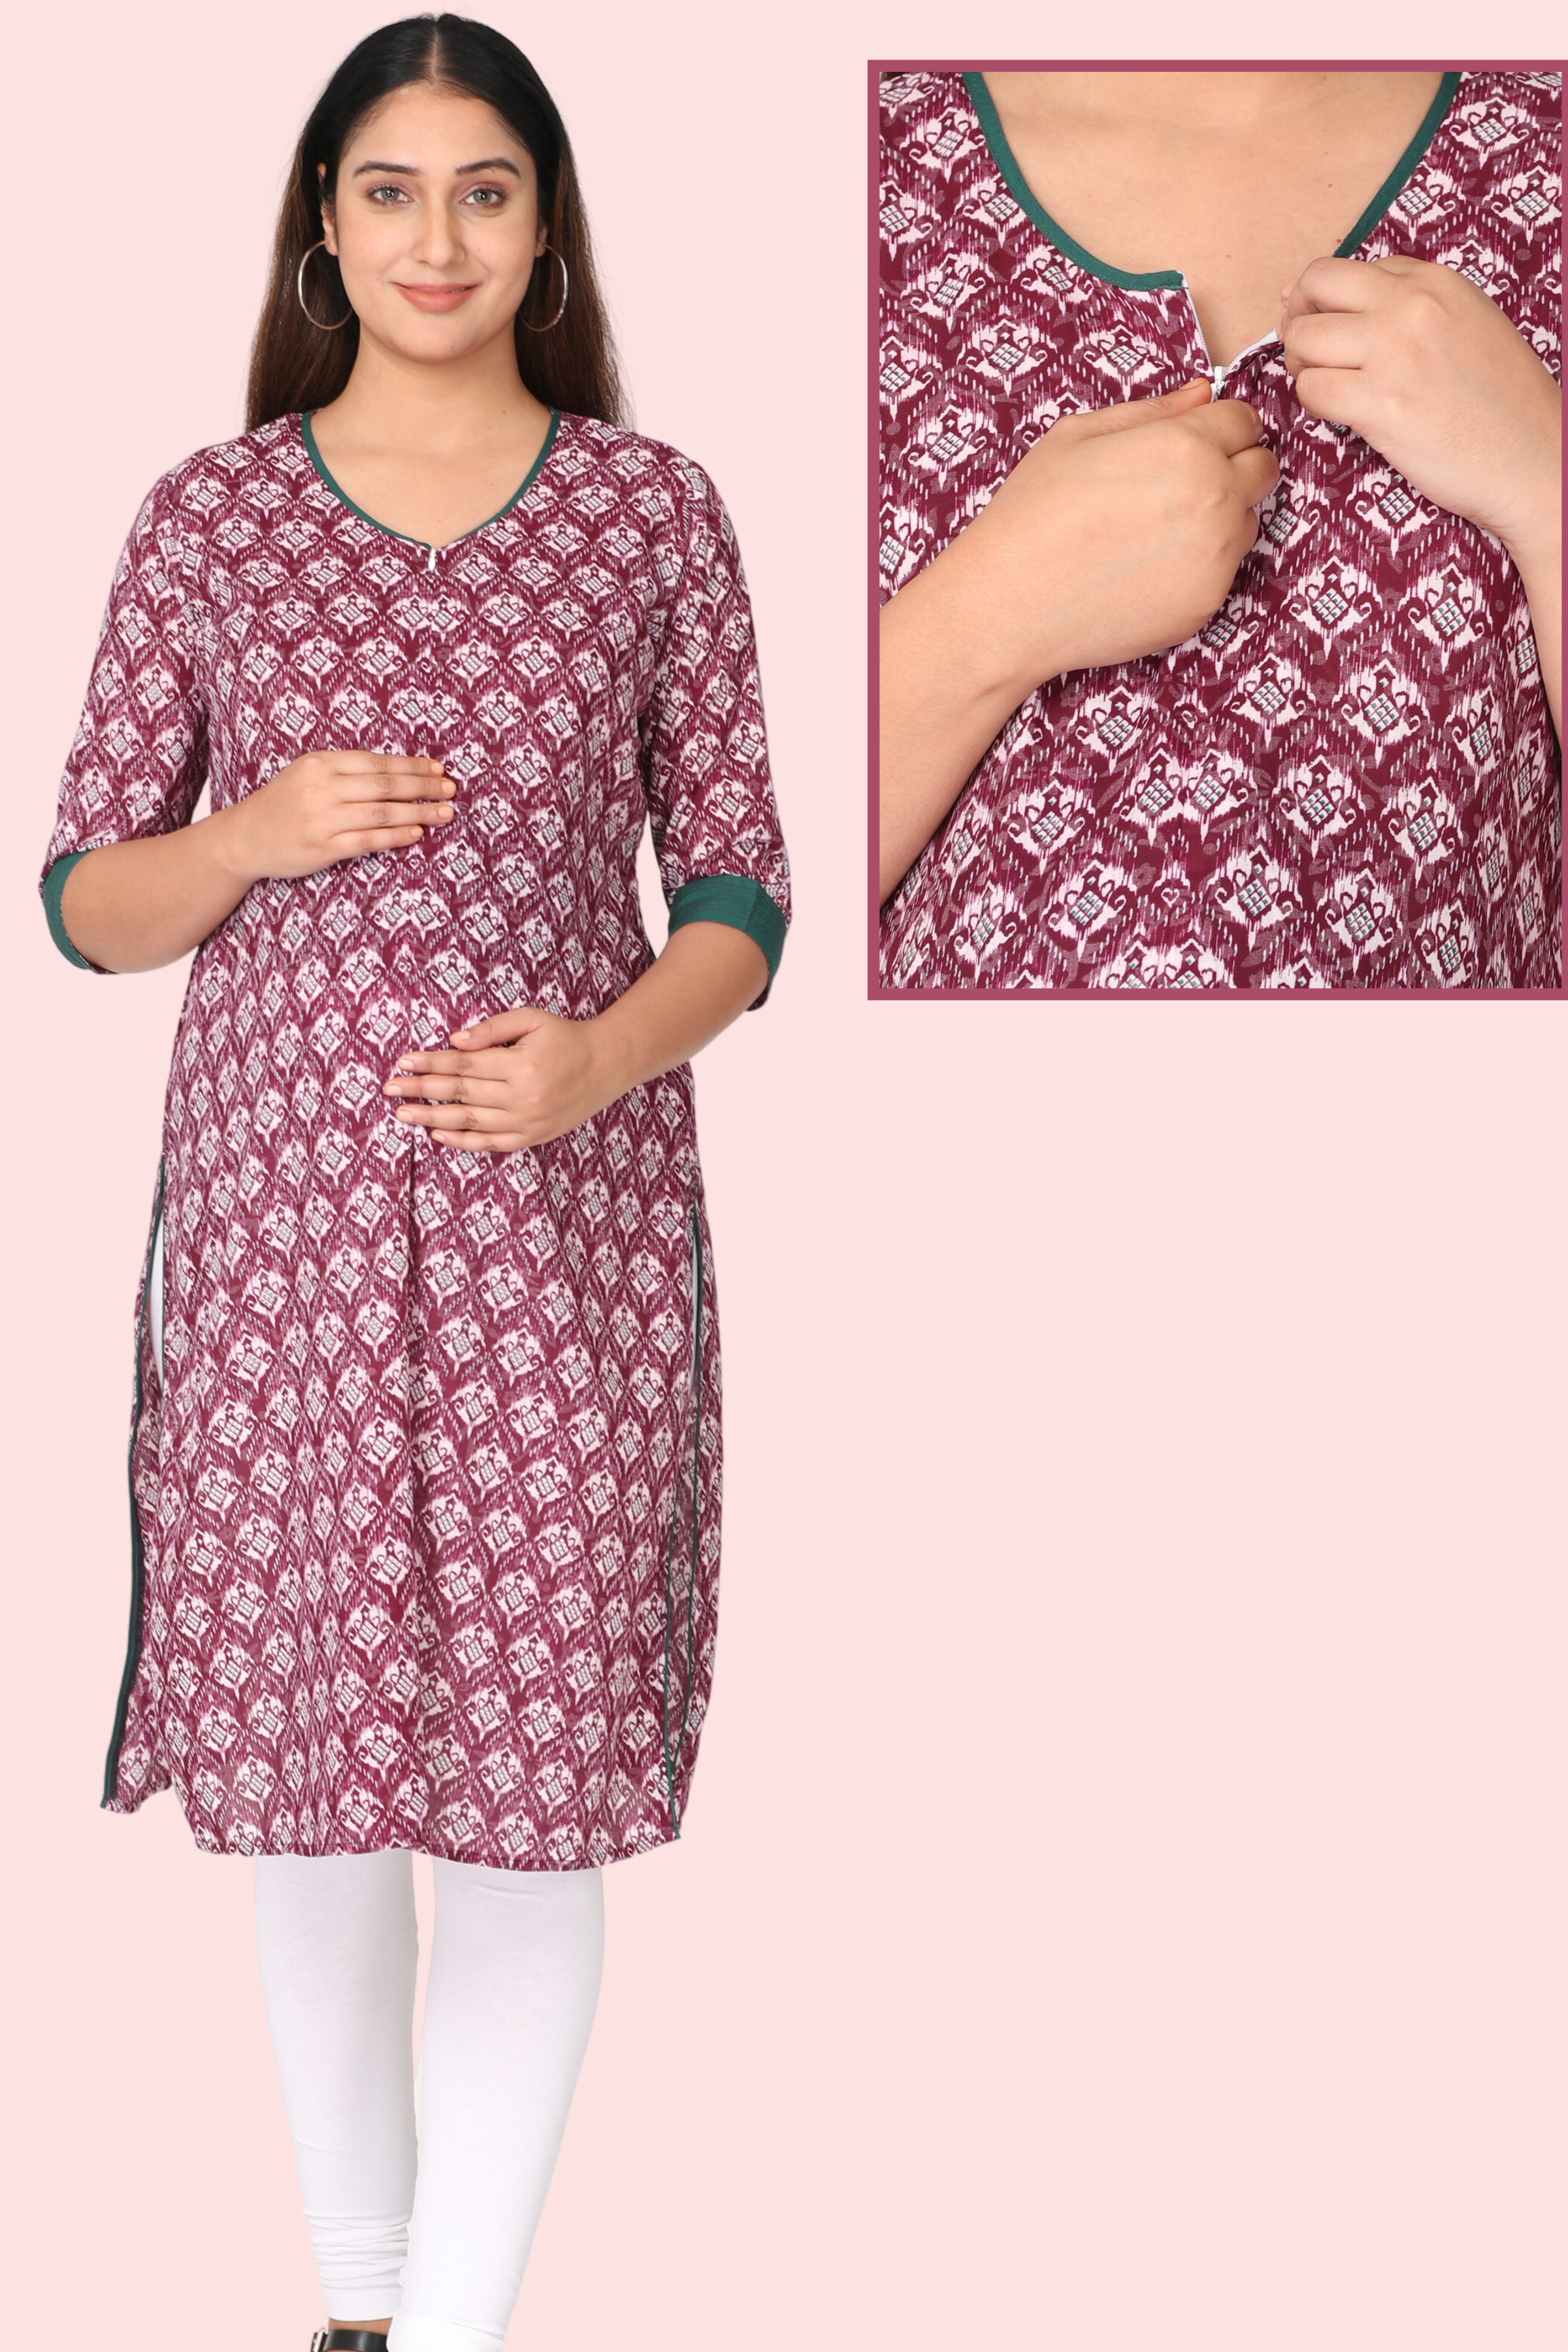 Buy Kita Fashion Pure Cotton Anarkali Comfortable Maternity Feeding Kurta  Dress with Zippers for Pregnant Womens | All Over Printed Feeding Dress for  Mothers Online In India At Discounted Prices